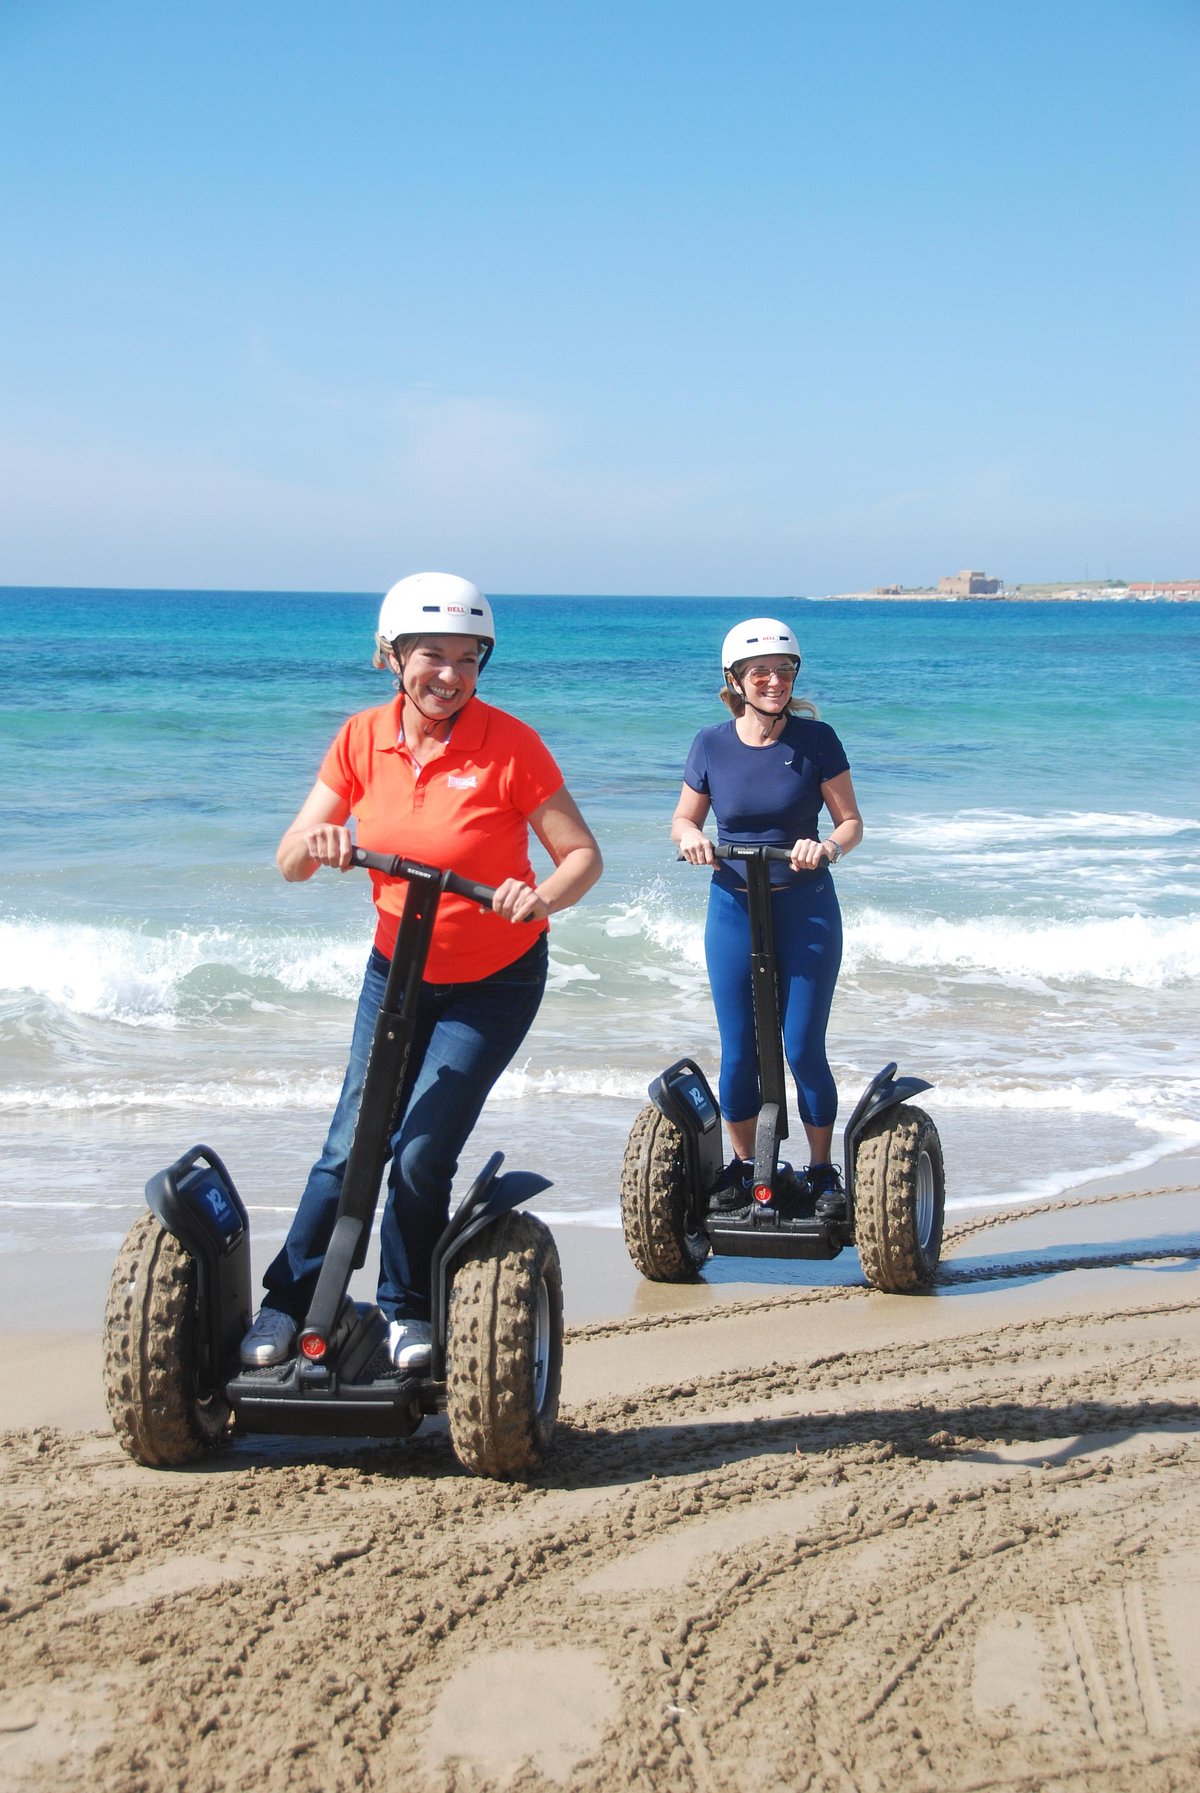 TrySegway Tours - All You Need to Know BEFORE You Go